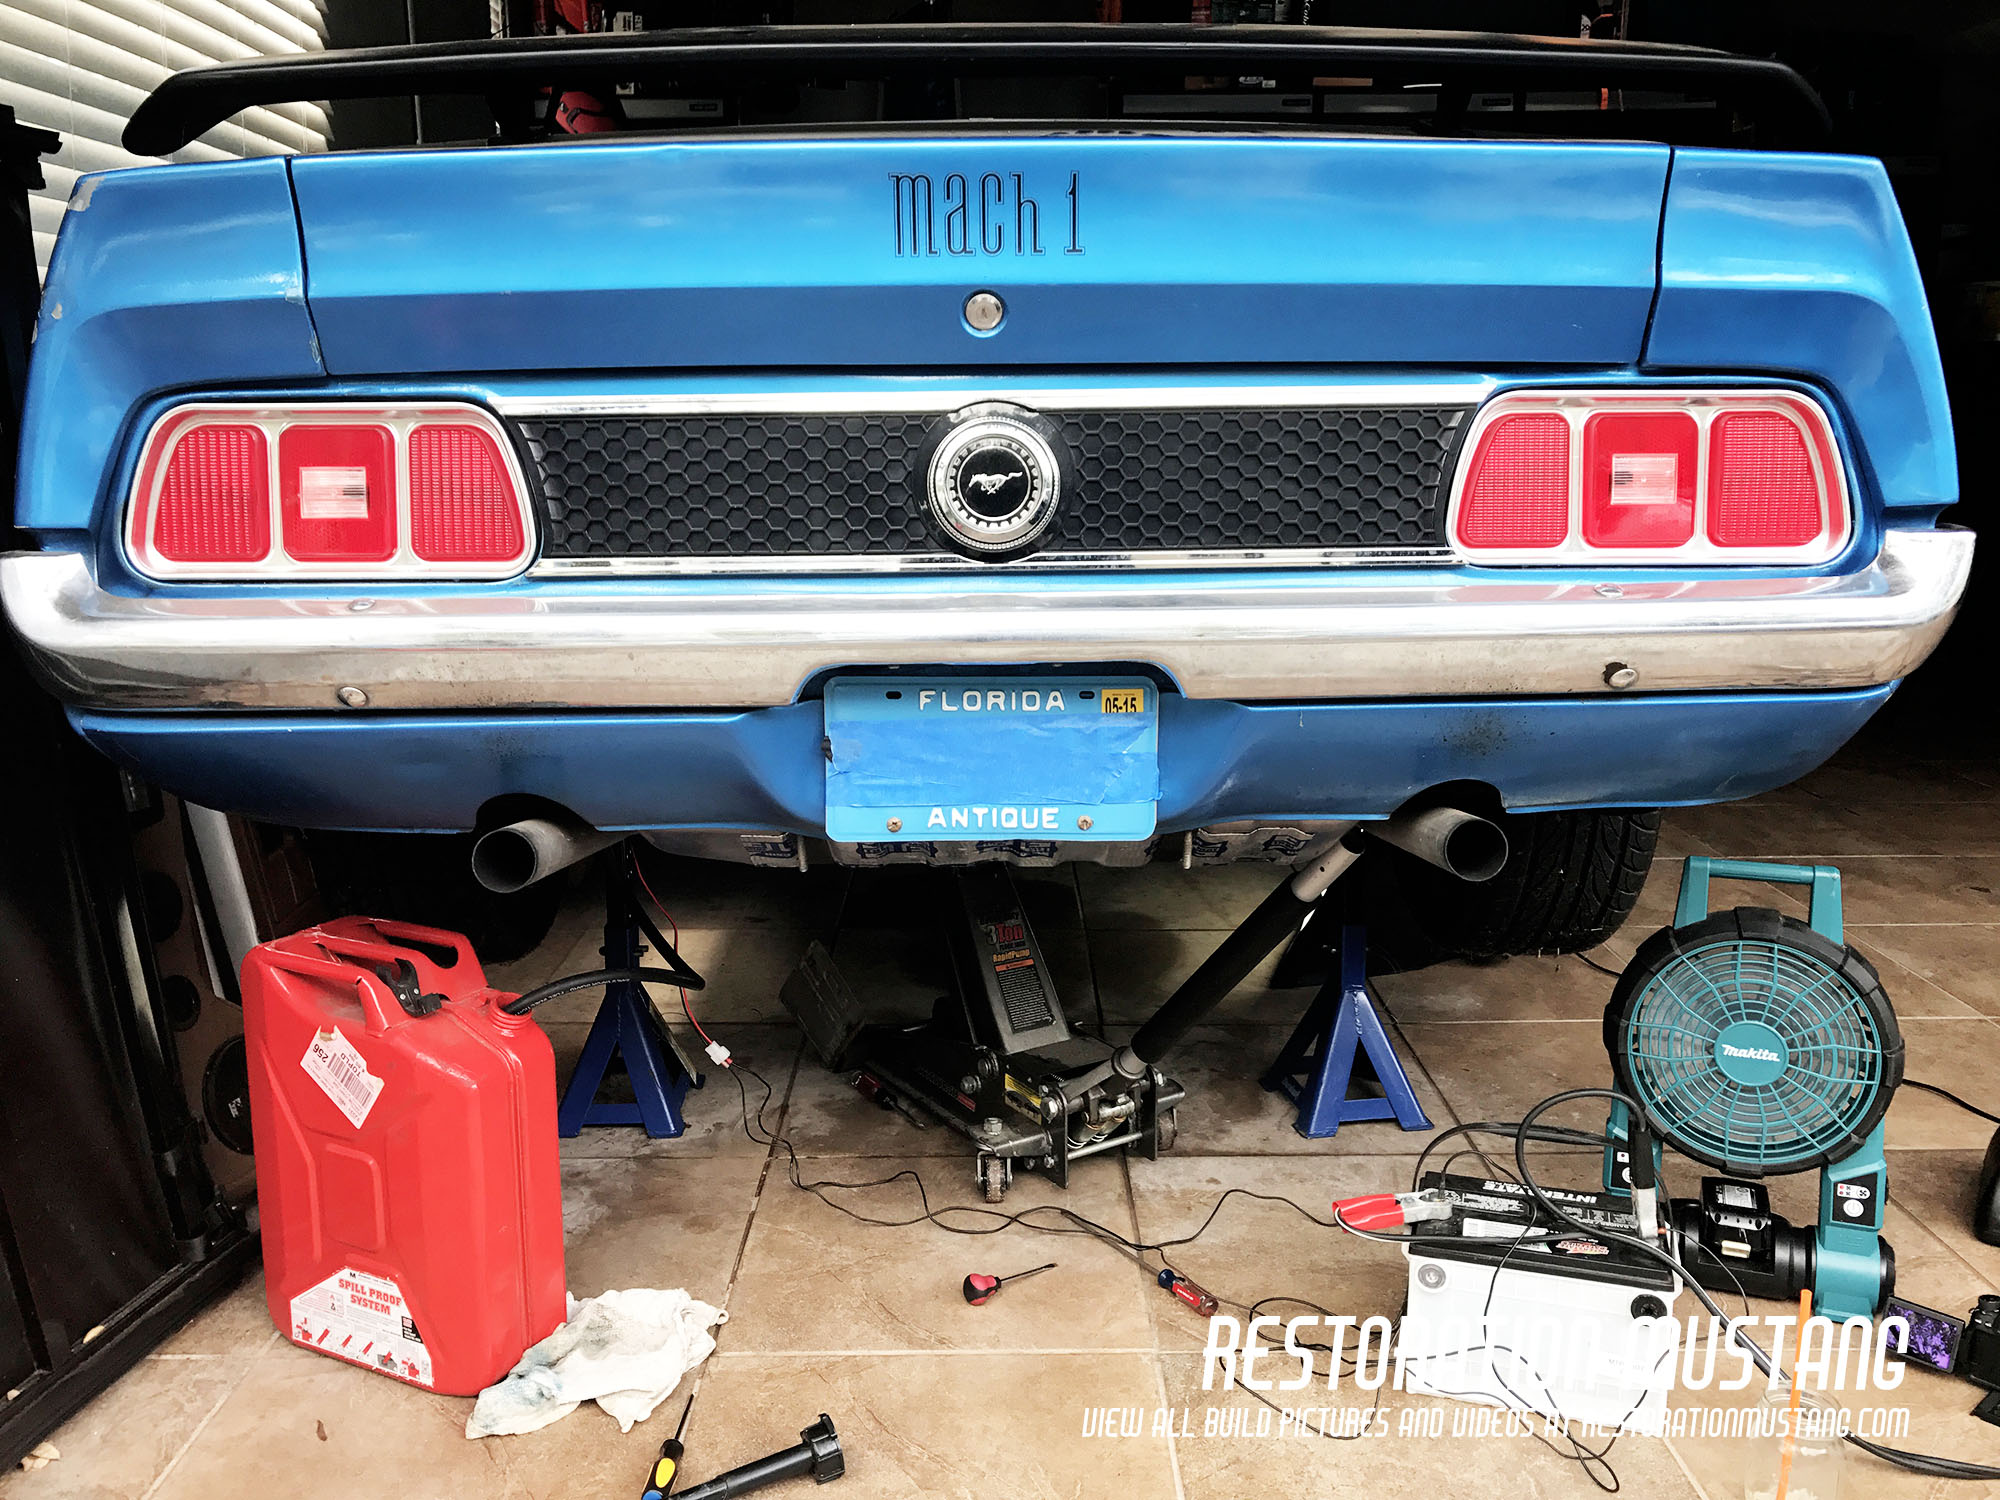 Showing the back of the Mustang prior to removal of the gas tank. Fuel pump drain in place